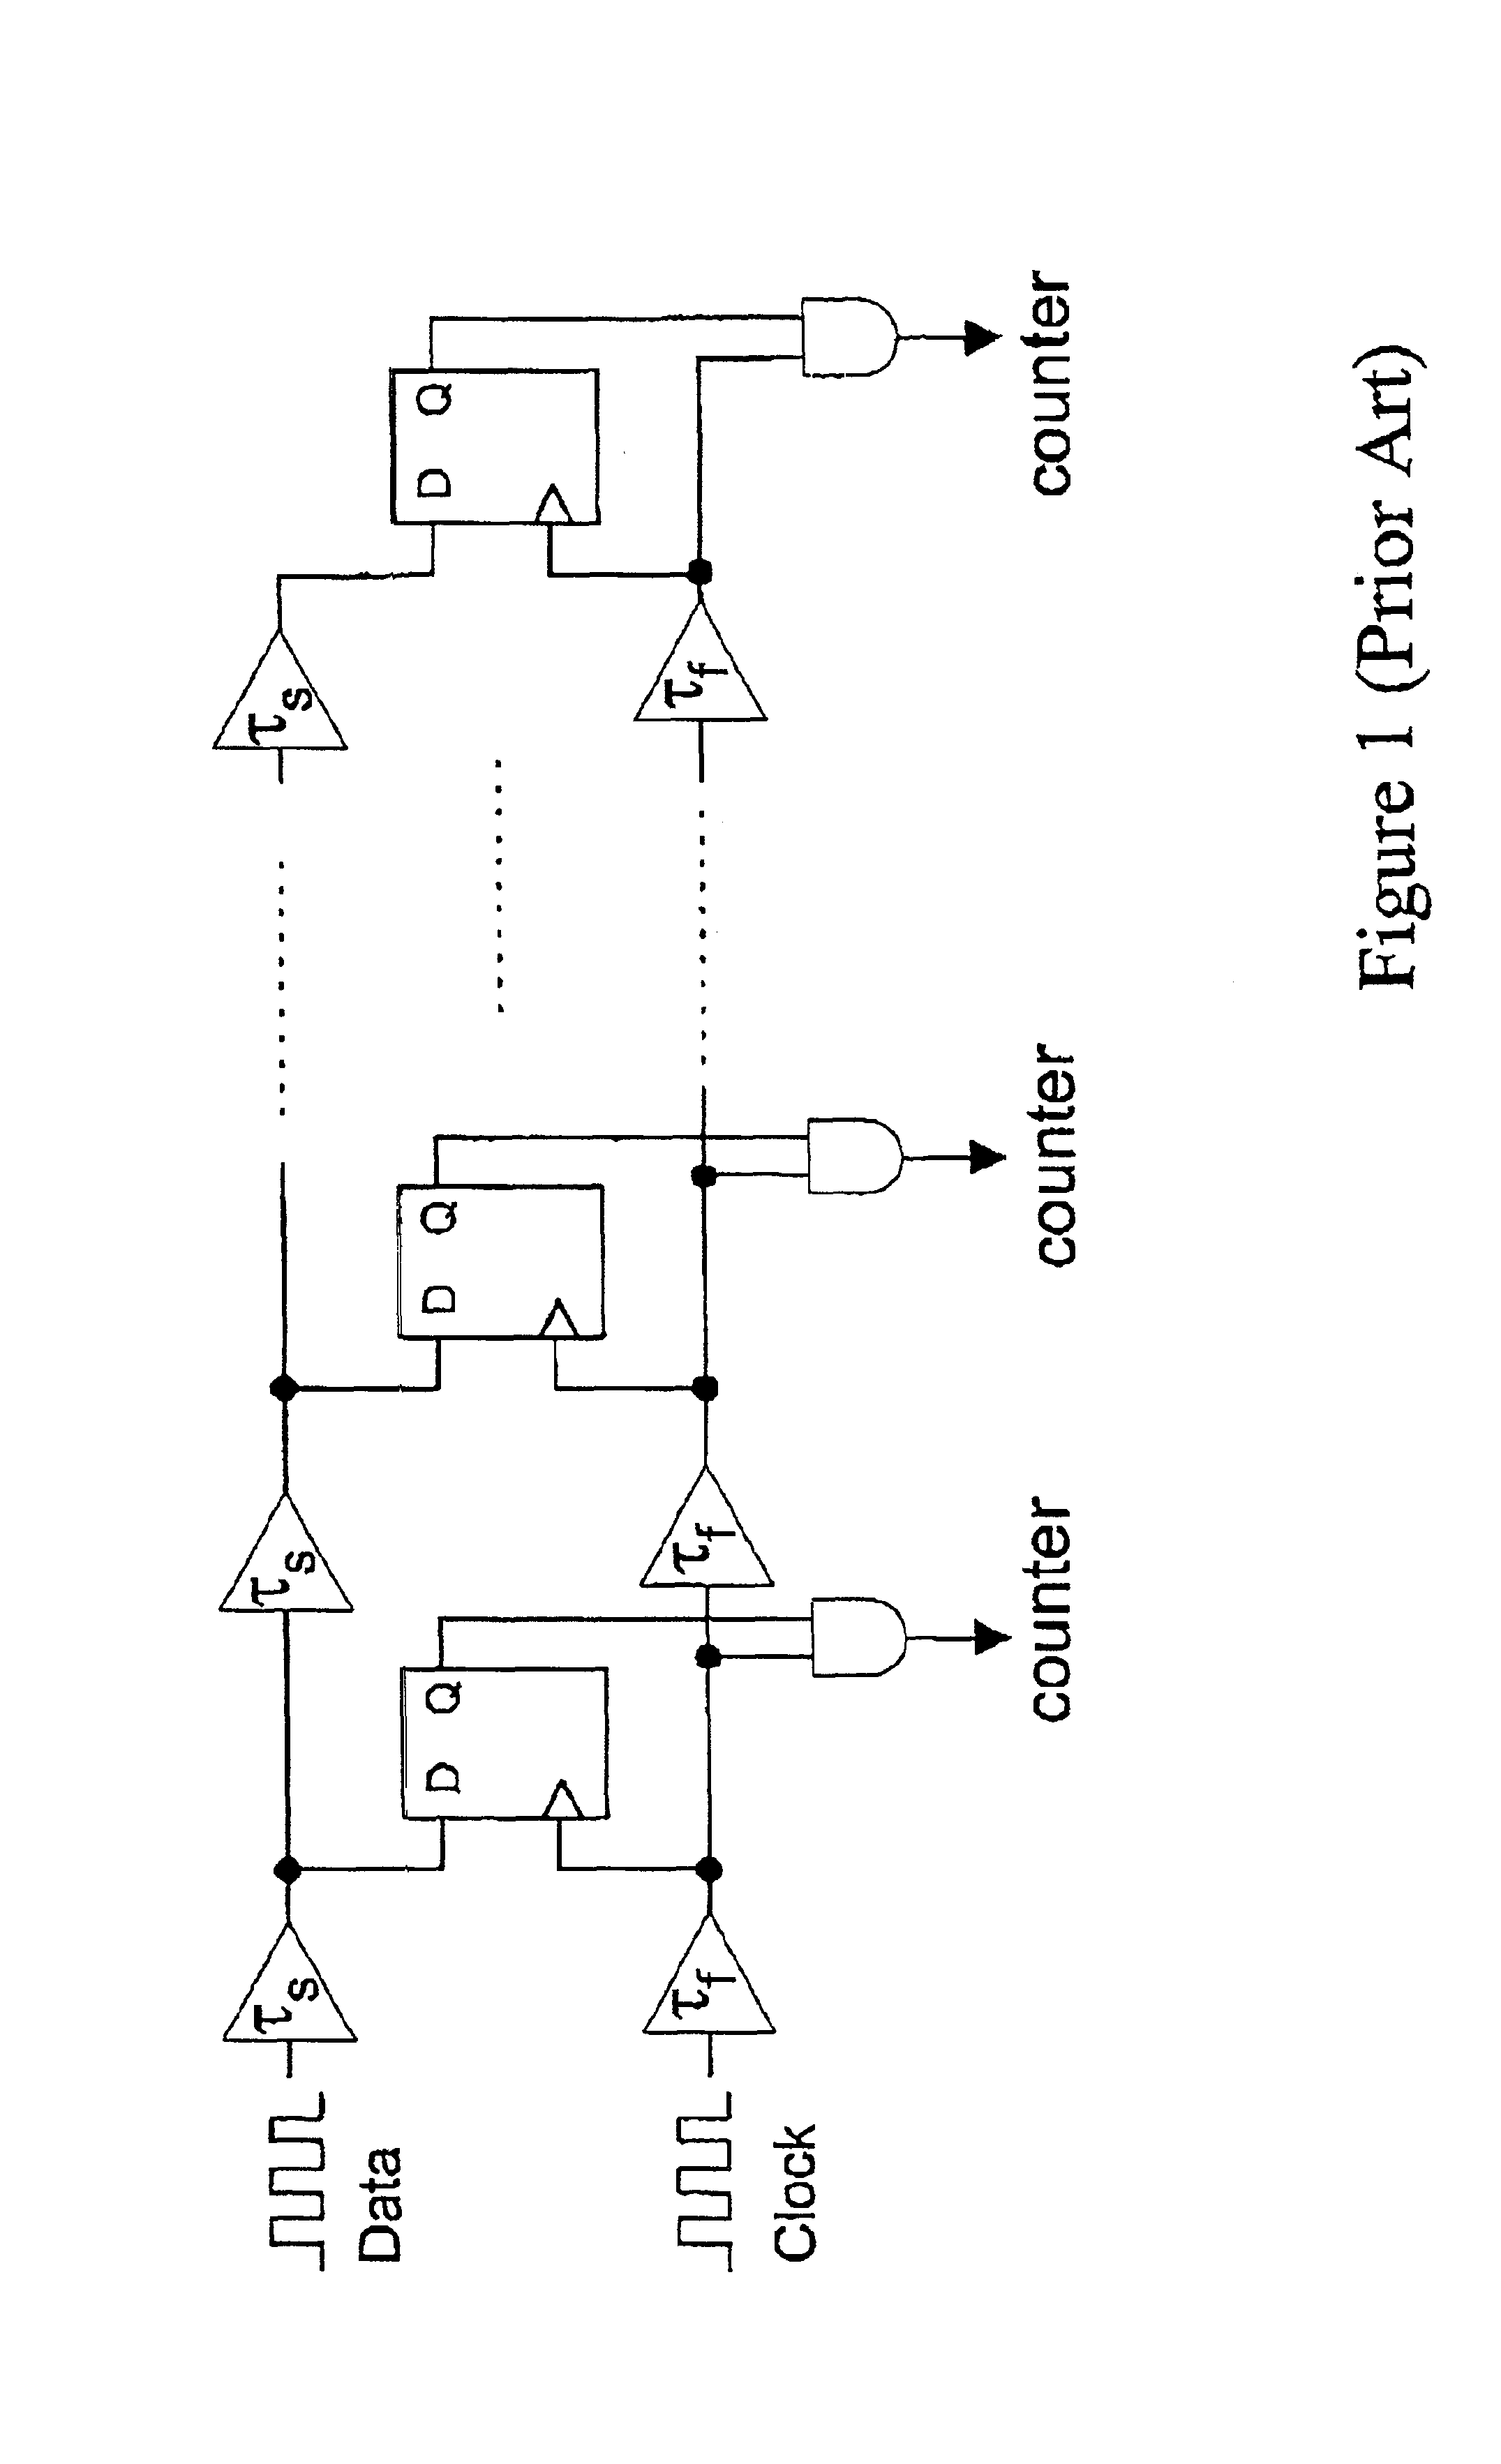 Timing measurement device using a component-invariant vernier delay line